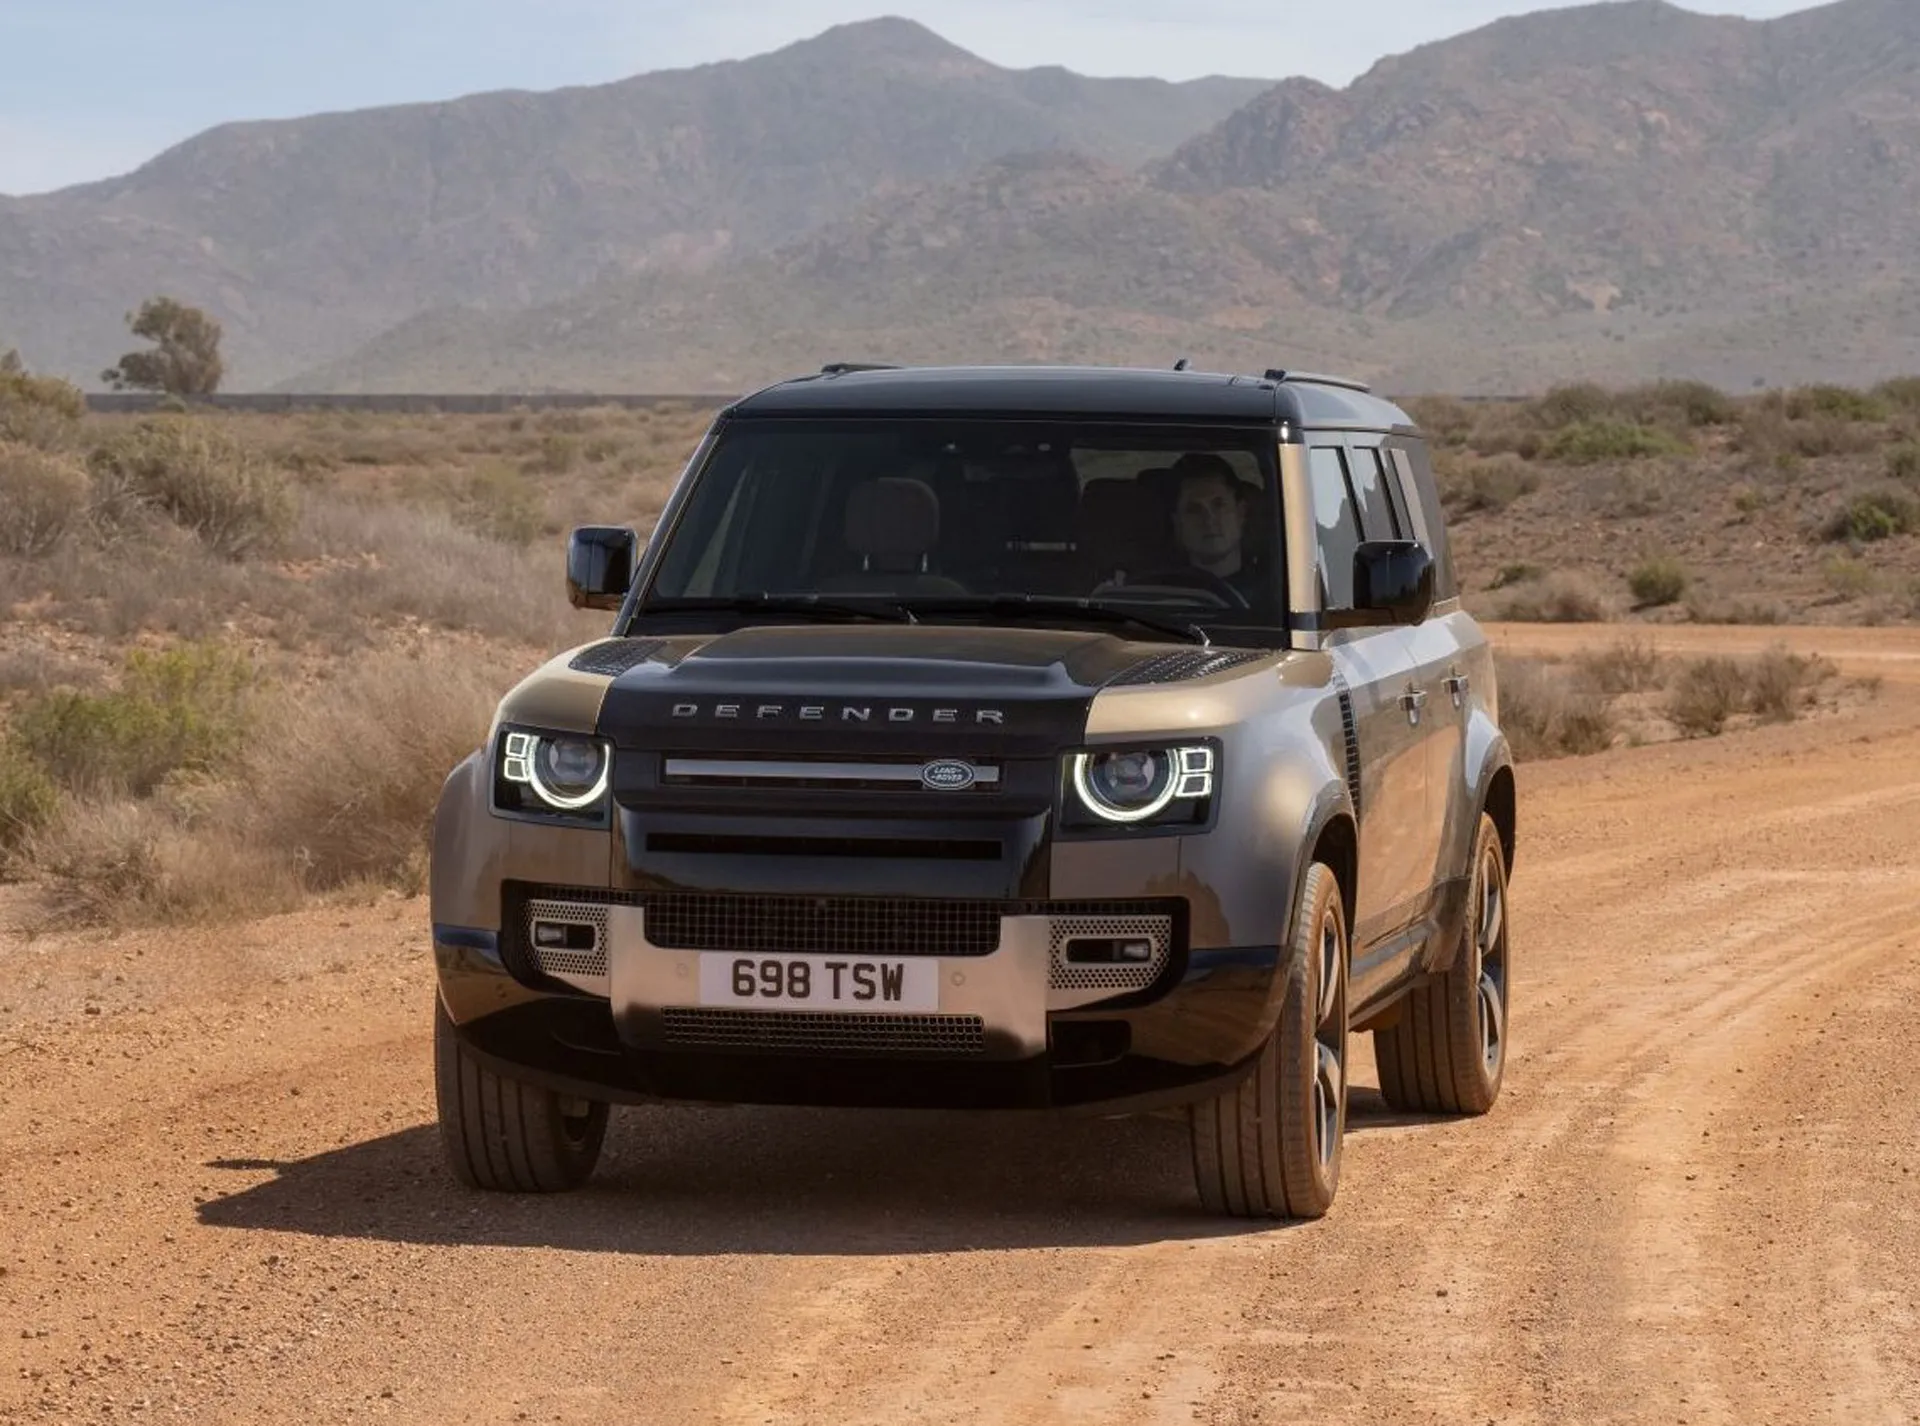 2025 Defender adds more luxury to capable off-roader